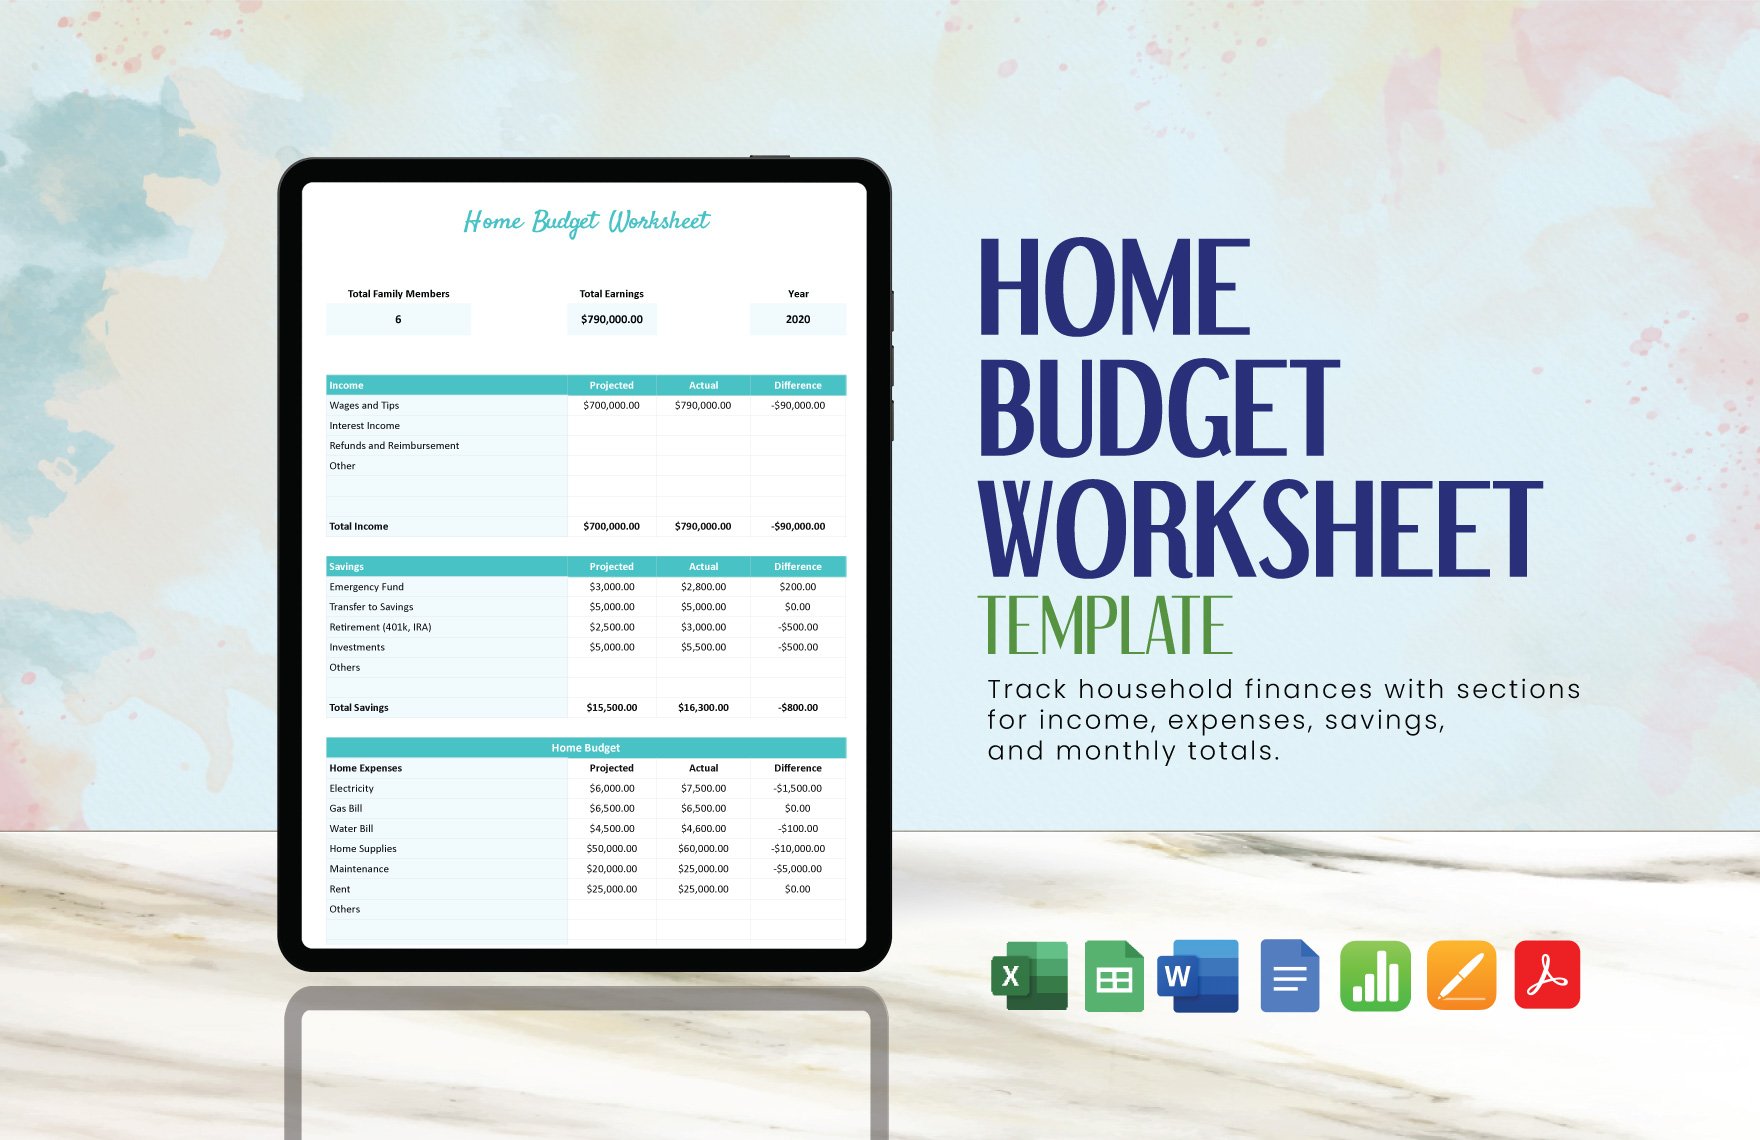 Home Budget Worksheet Template in Word, Google Docs, Excel, PDF, Google Sheets, Apple Pages, Apple Numbers